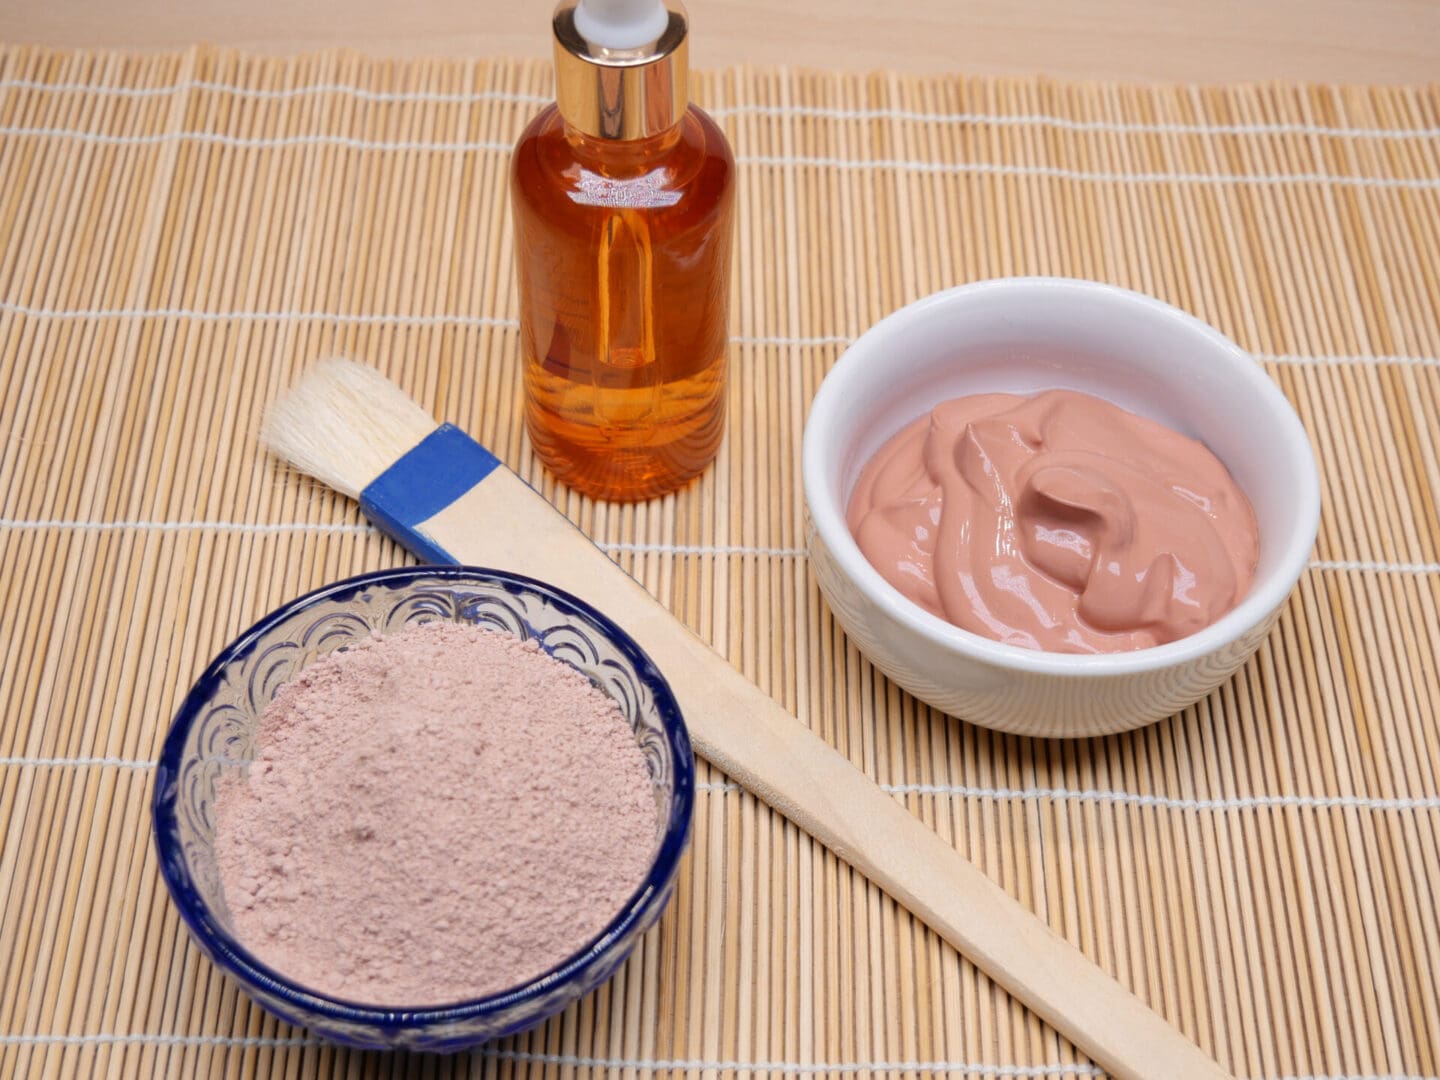 A French Pink Clay Face Mask Powder for Dry, Sensitive Skin and a brush.